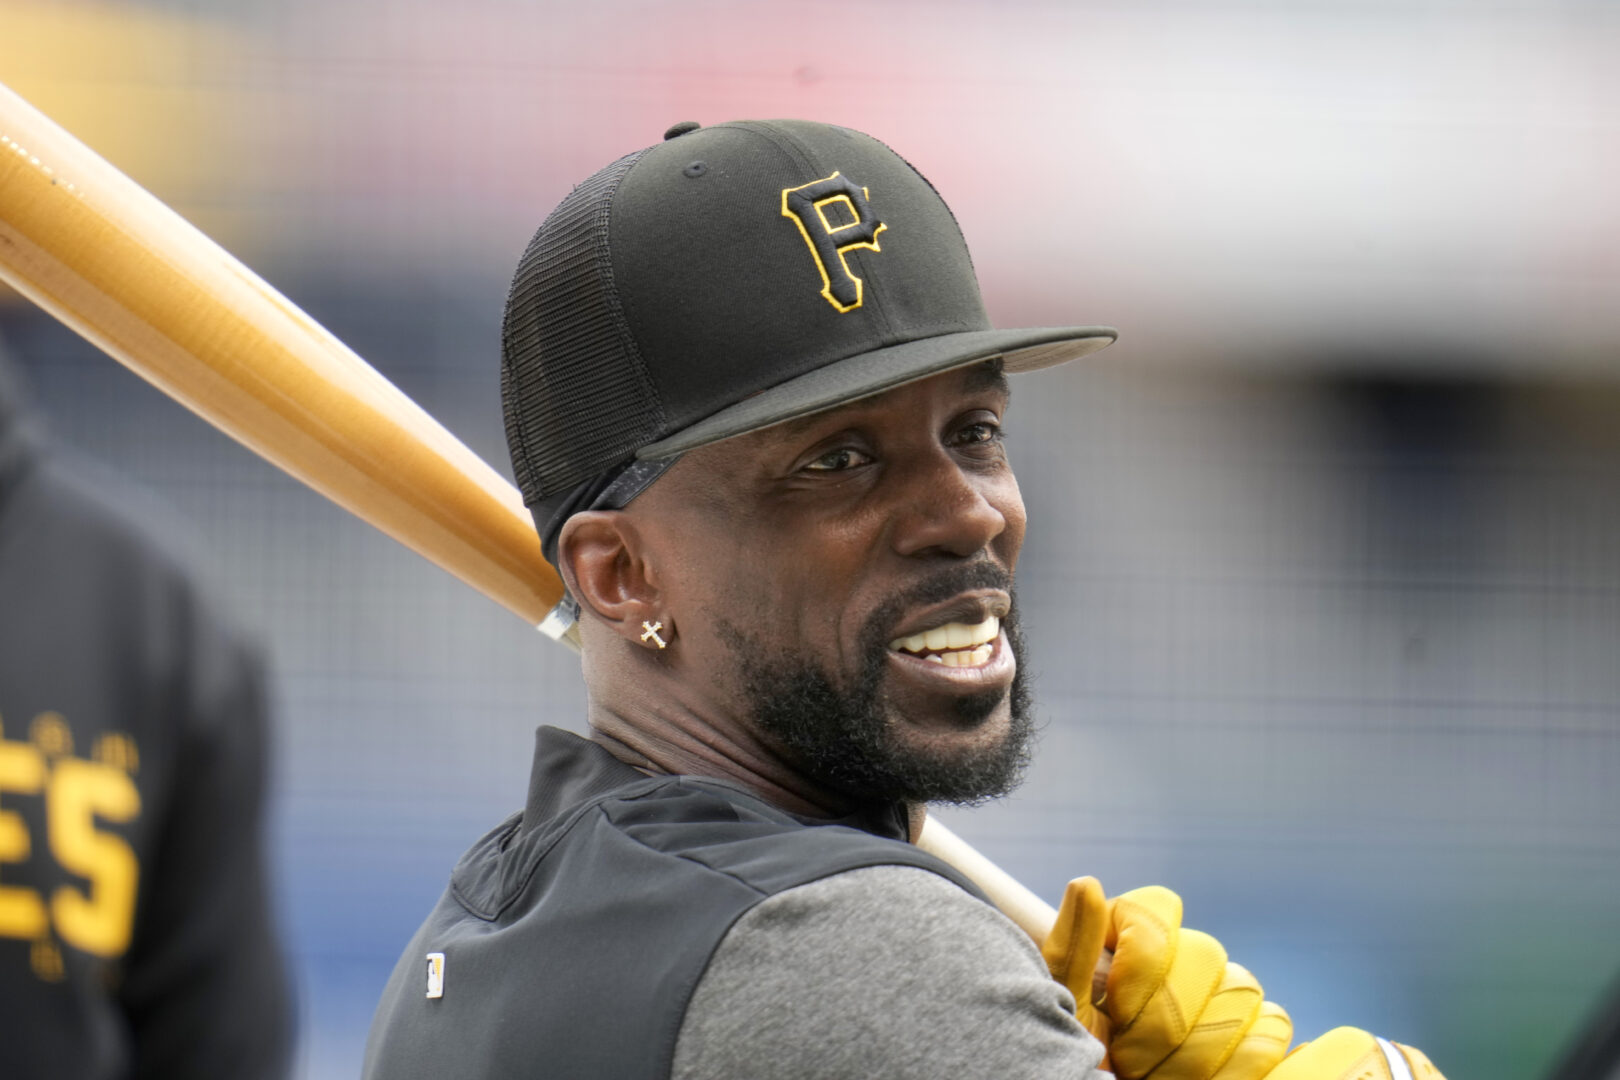 Pittsburgh Pirates' Andrew McCutchen waits his turn in the batting cage before the Pirates home opener baseball game against the Chicago White Sox in Pittsburgh, Friday, April, 7, 2023. (AP Photo/Gene J. Puskar)